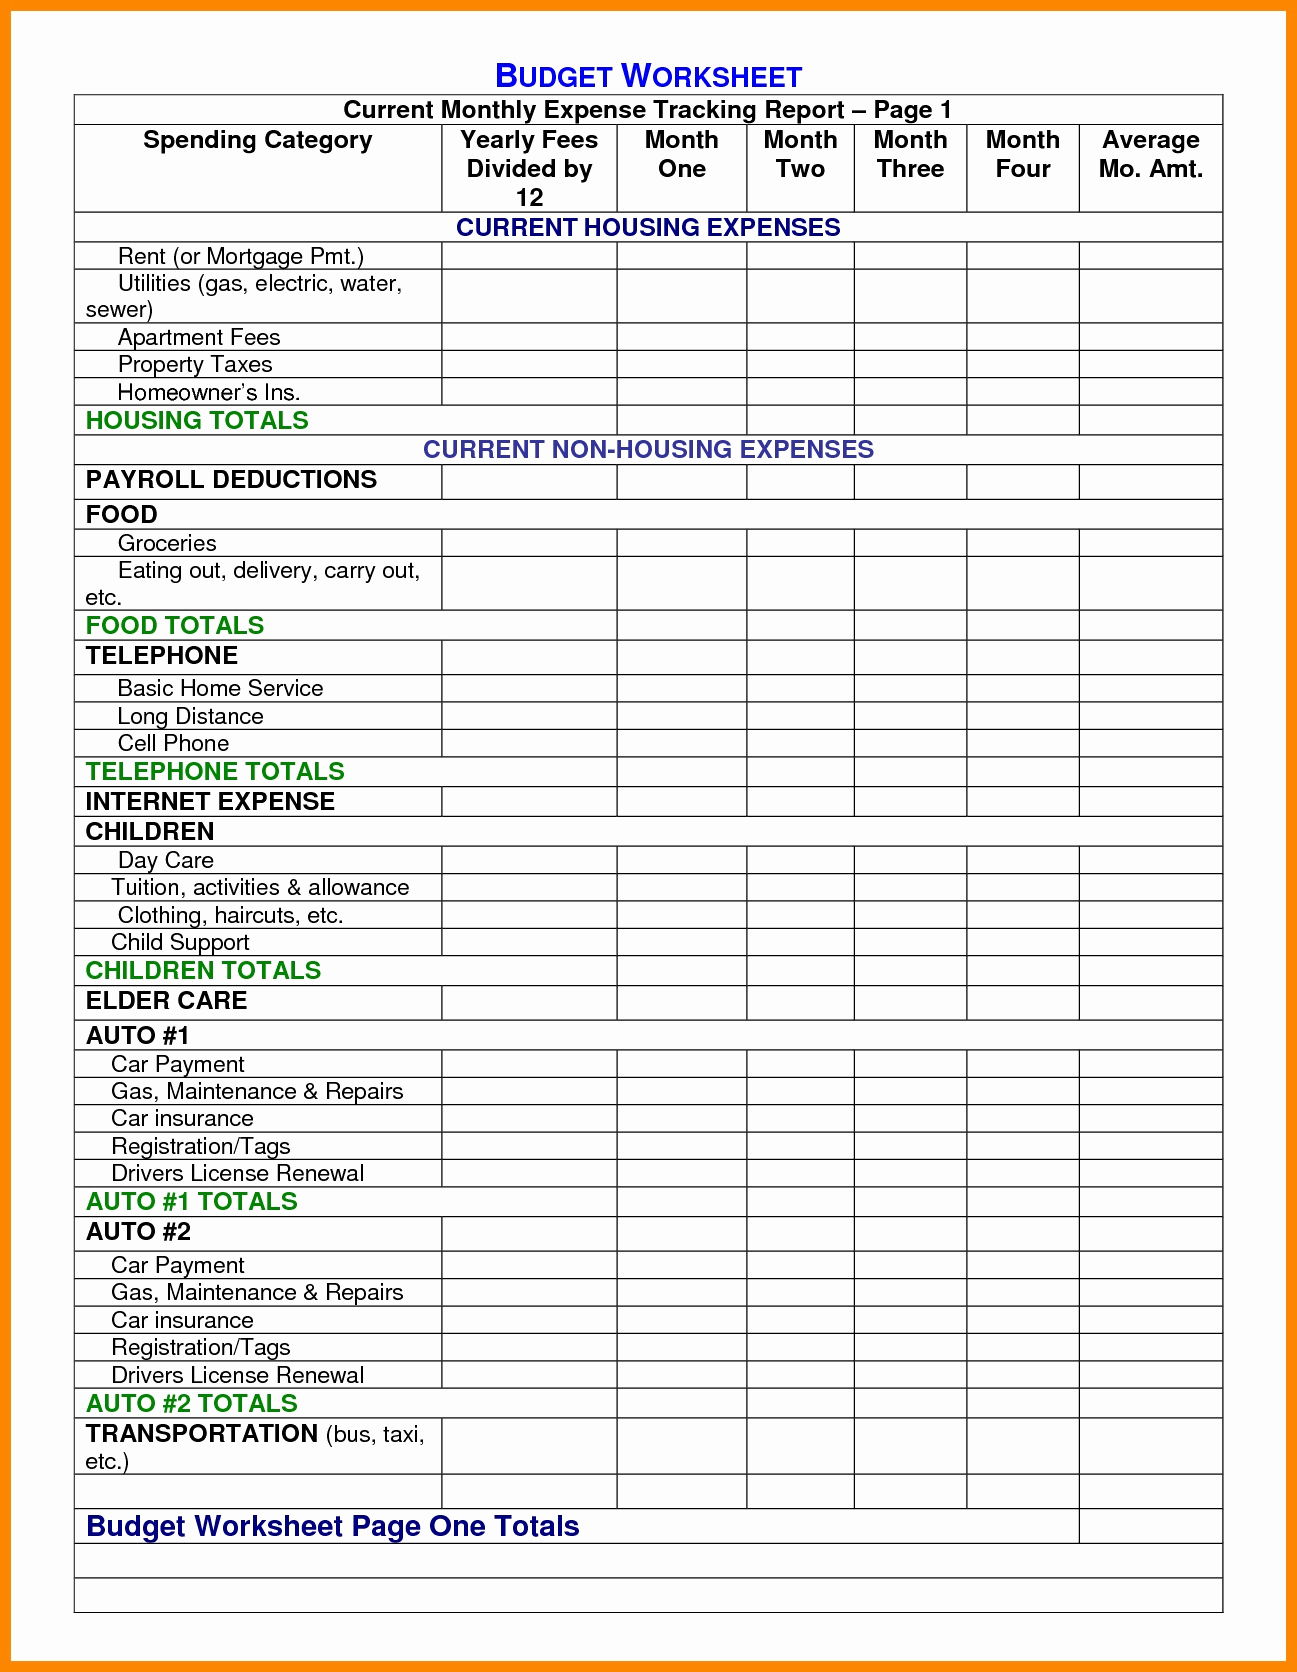 Building Construction Estimate Spreadsheet Excel Download Beautiful intended for Construction Estimate Spreadsheet